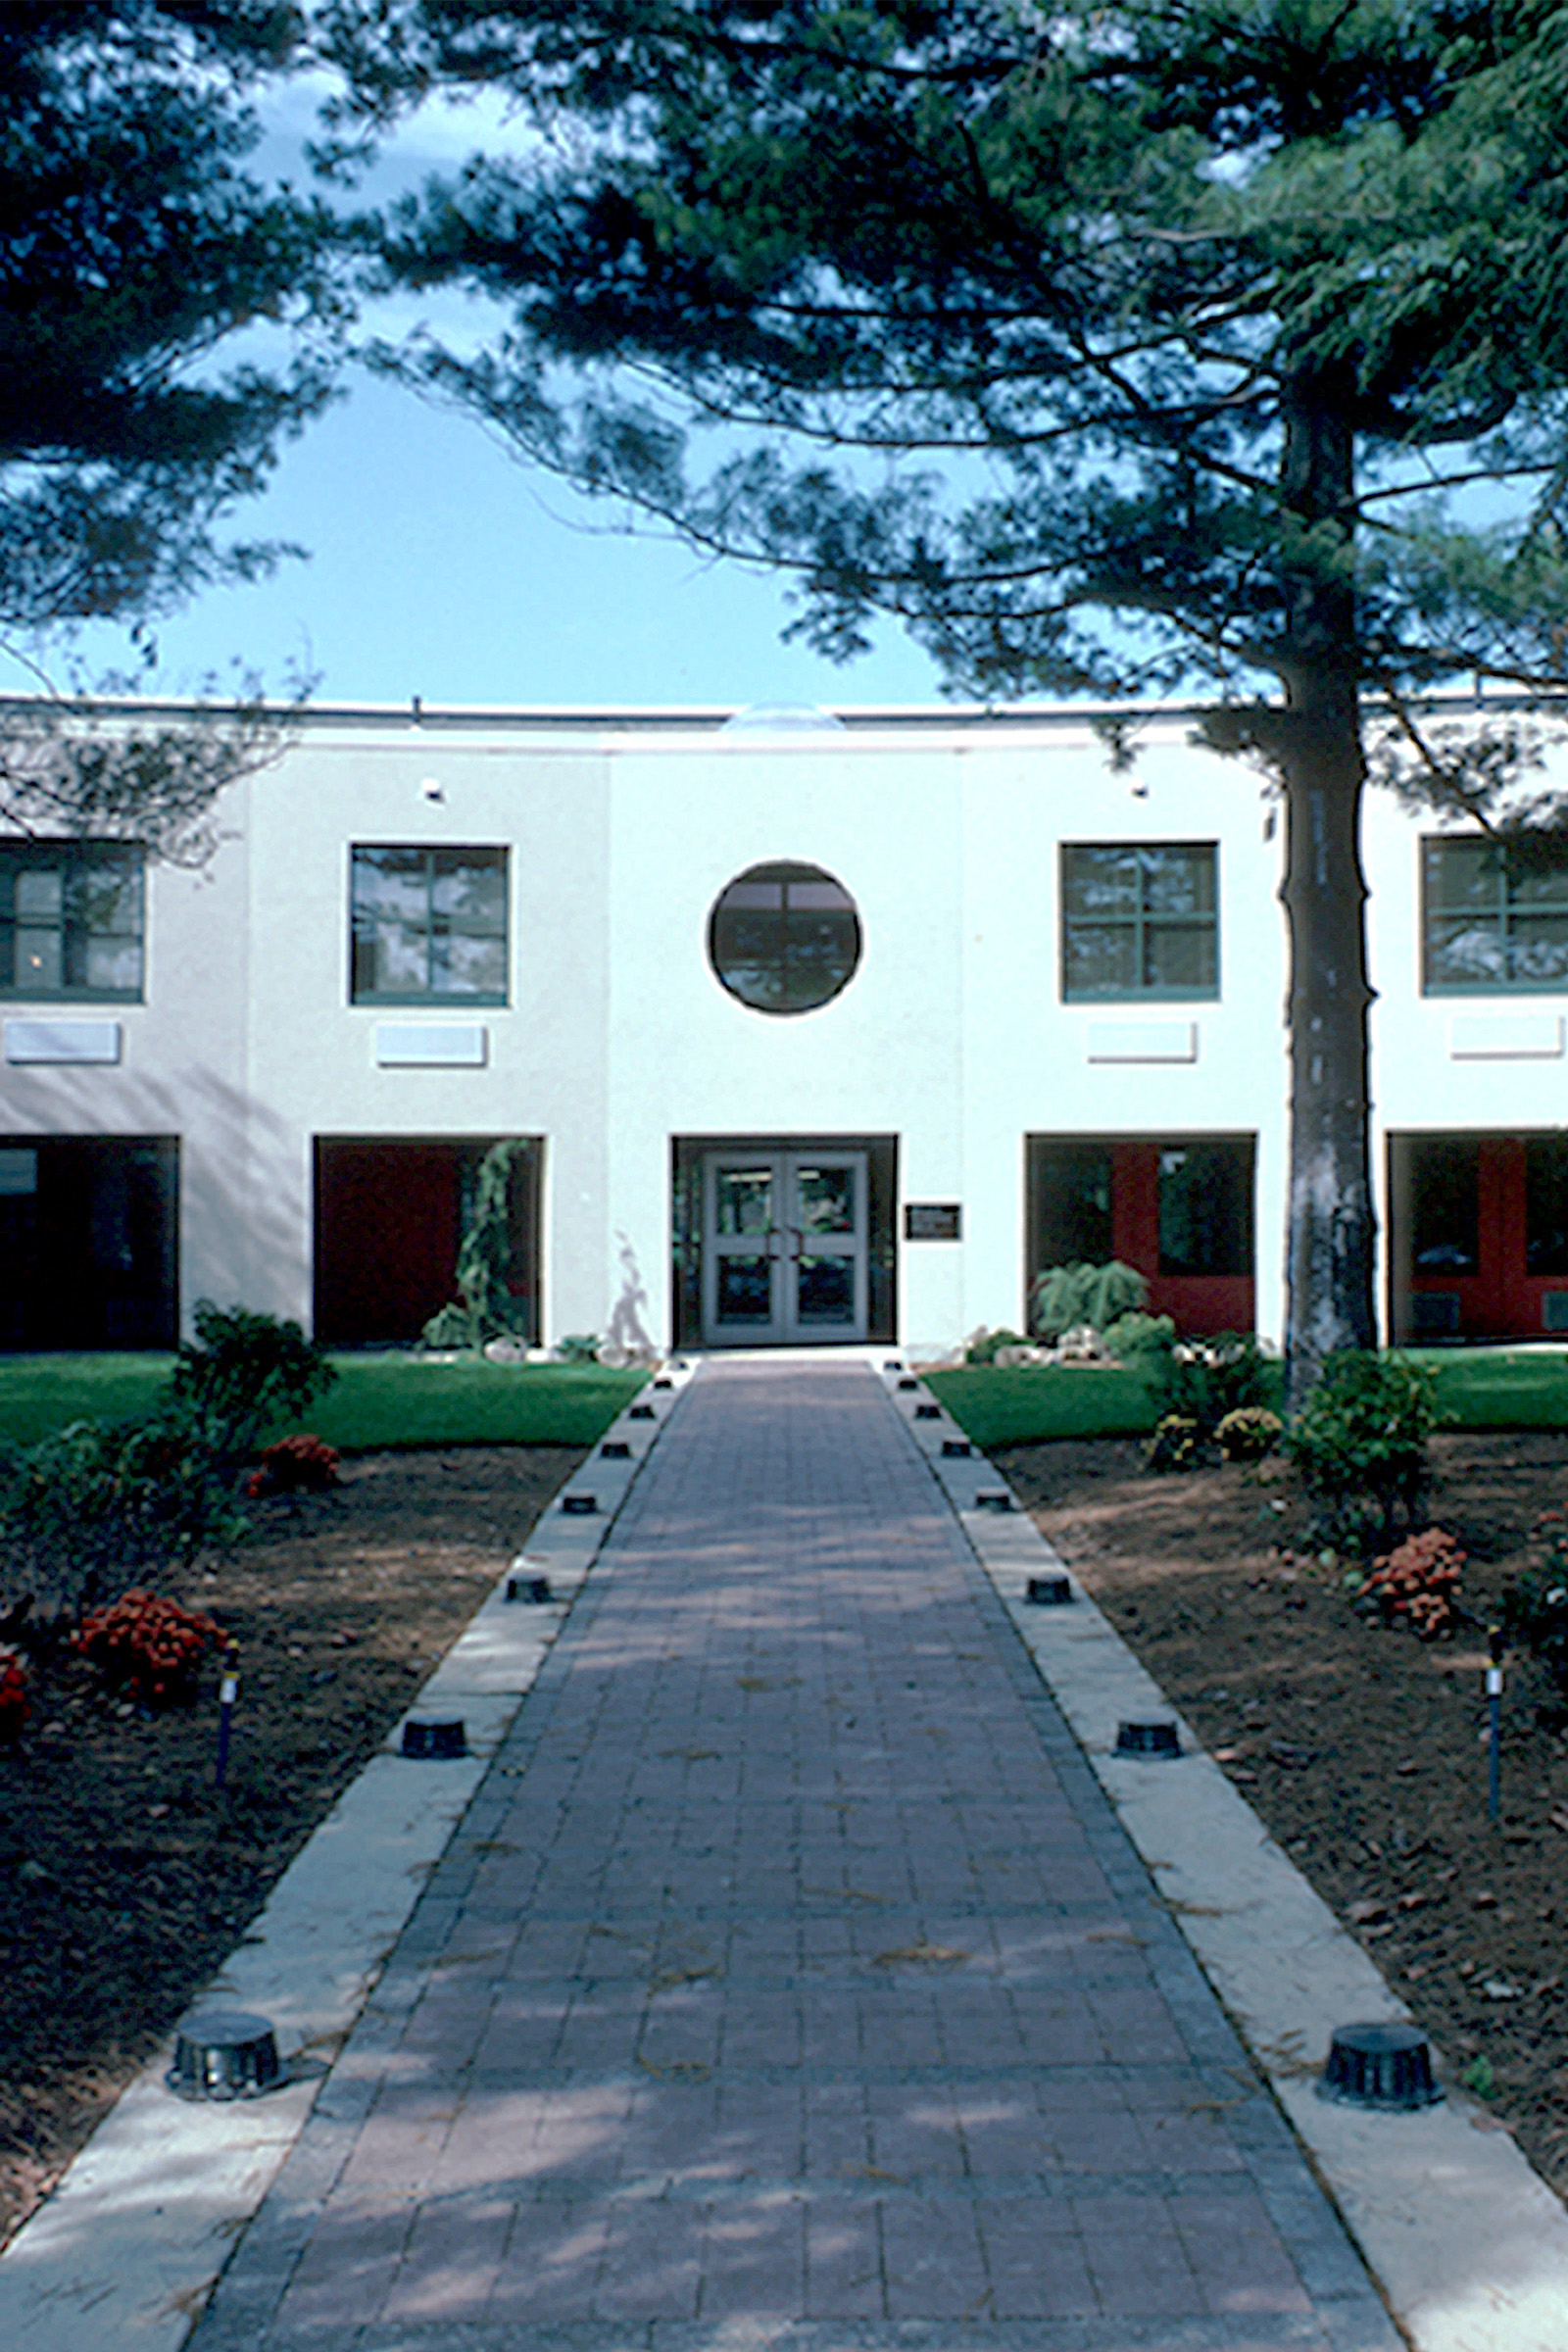 Exterior View 3 - Site Entry to Building.jpg